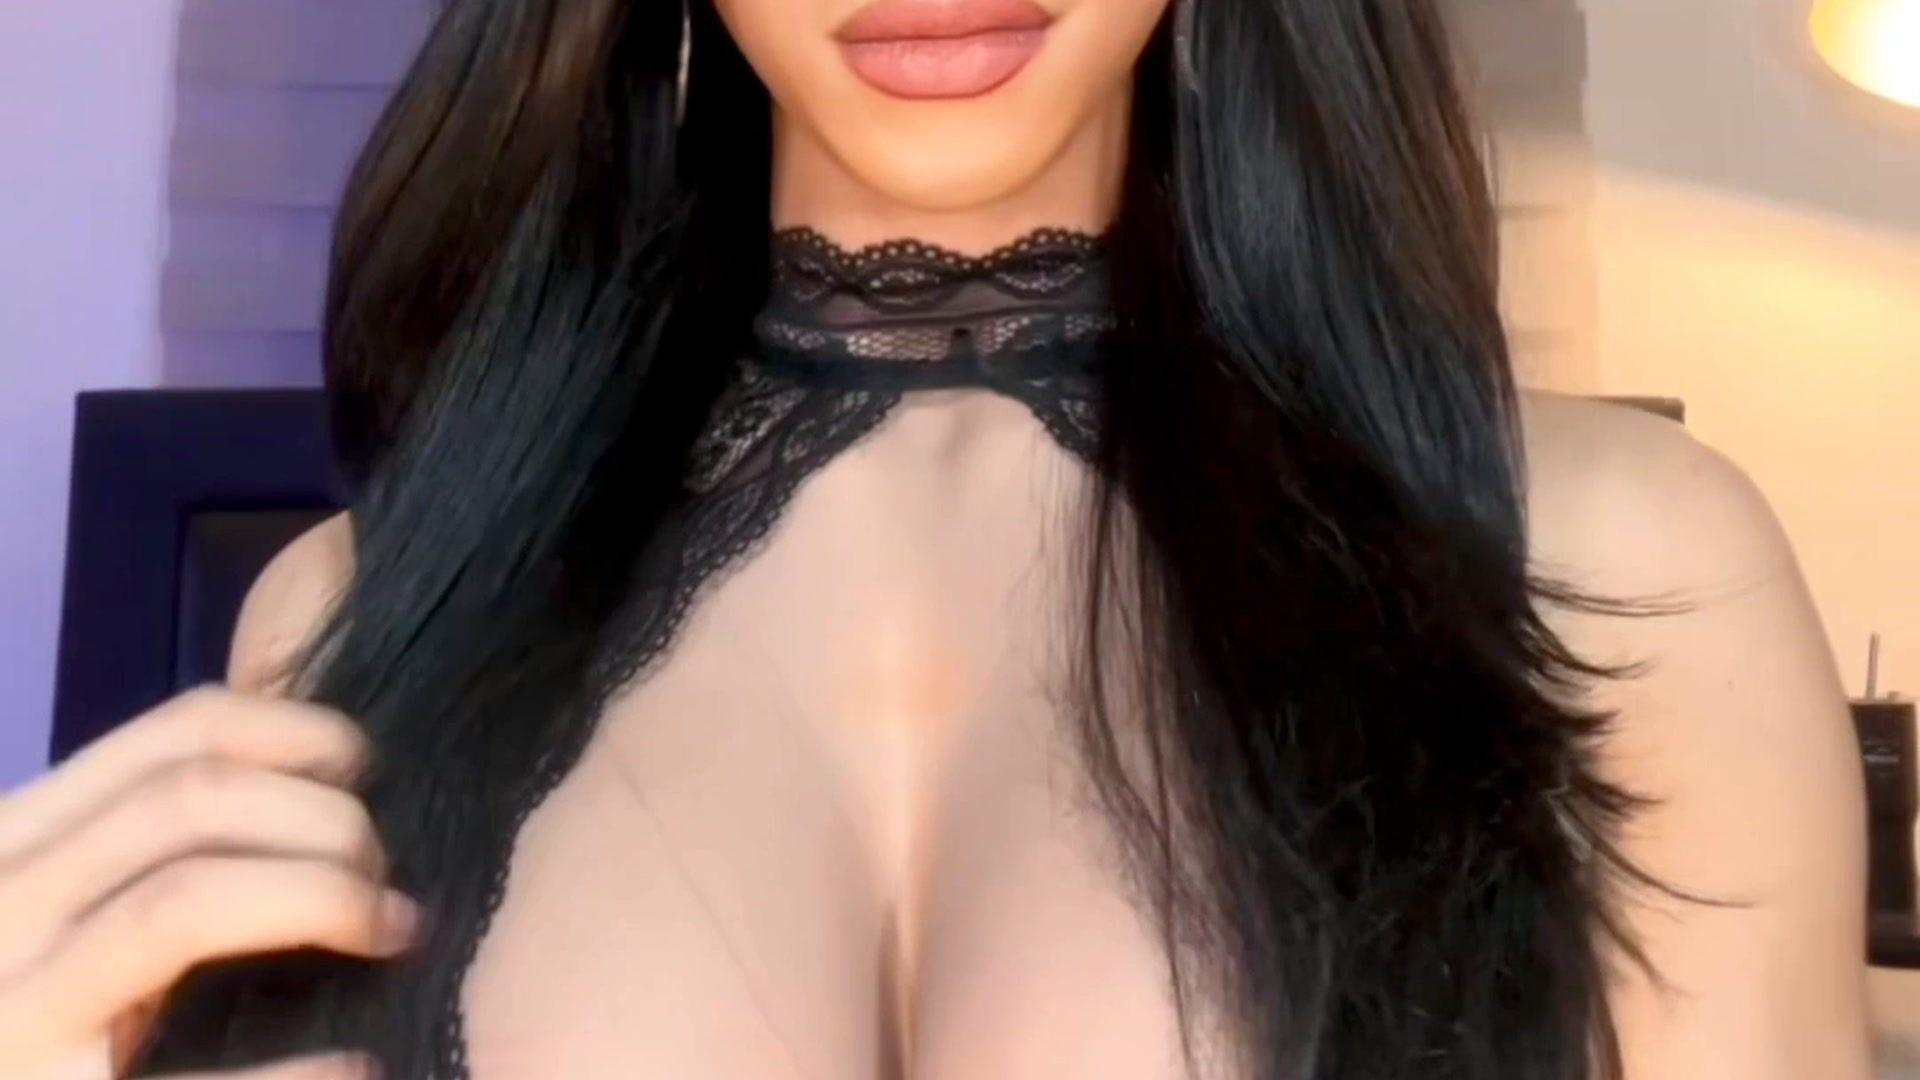 YOUR FACE BETWEEN MY TITS